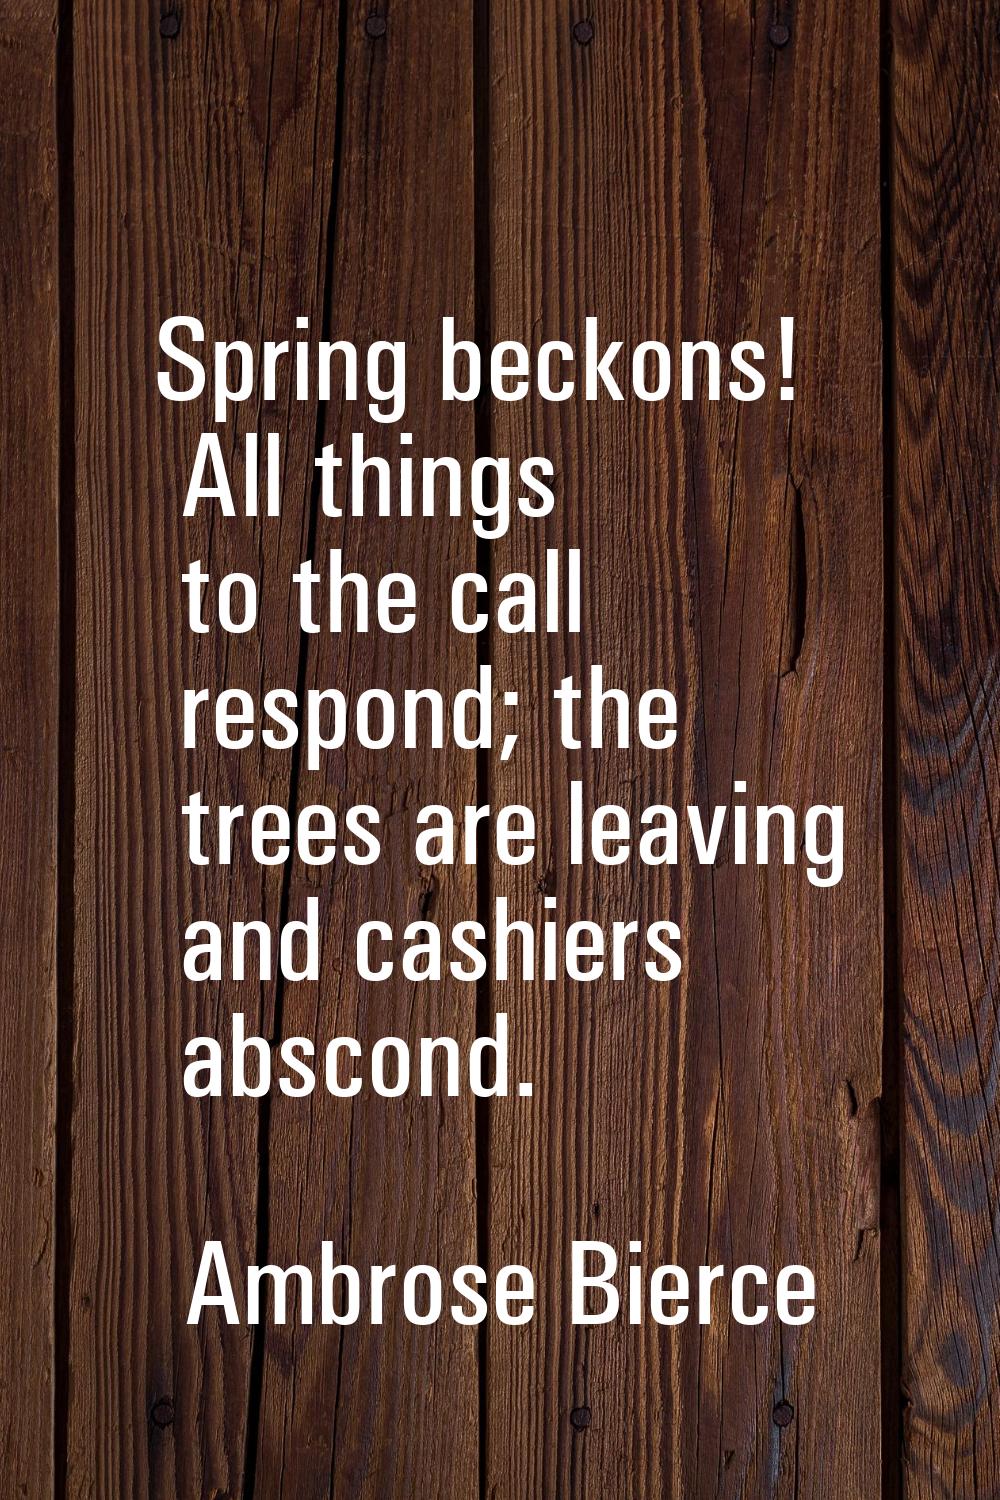 Spring beckons! All things to the call respond; the trees are leaving and cashiers abscond.